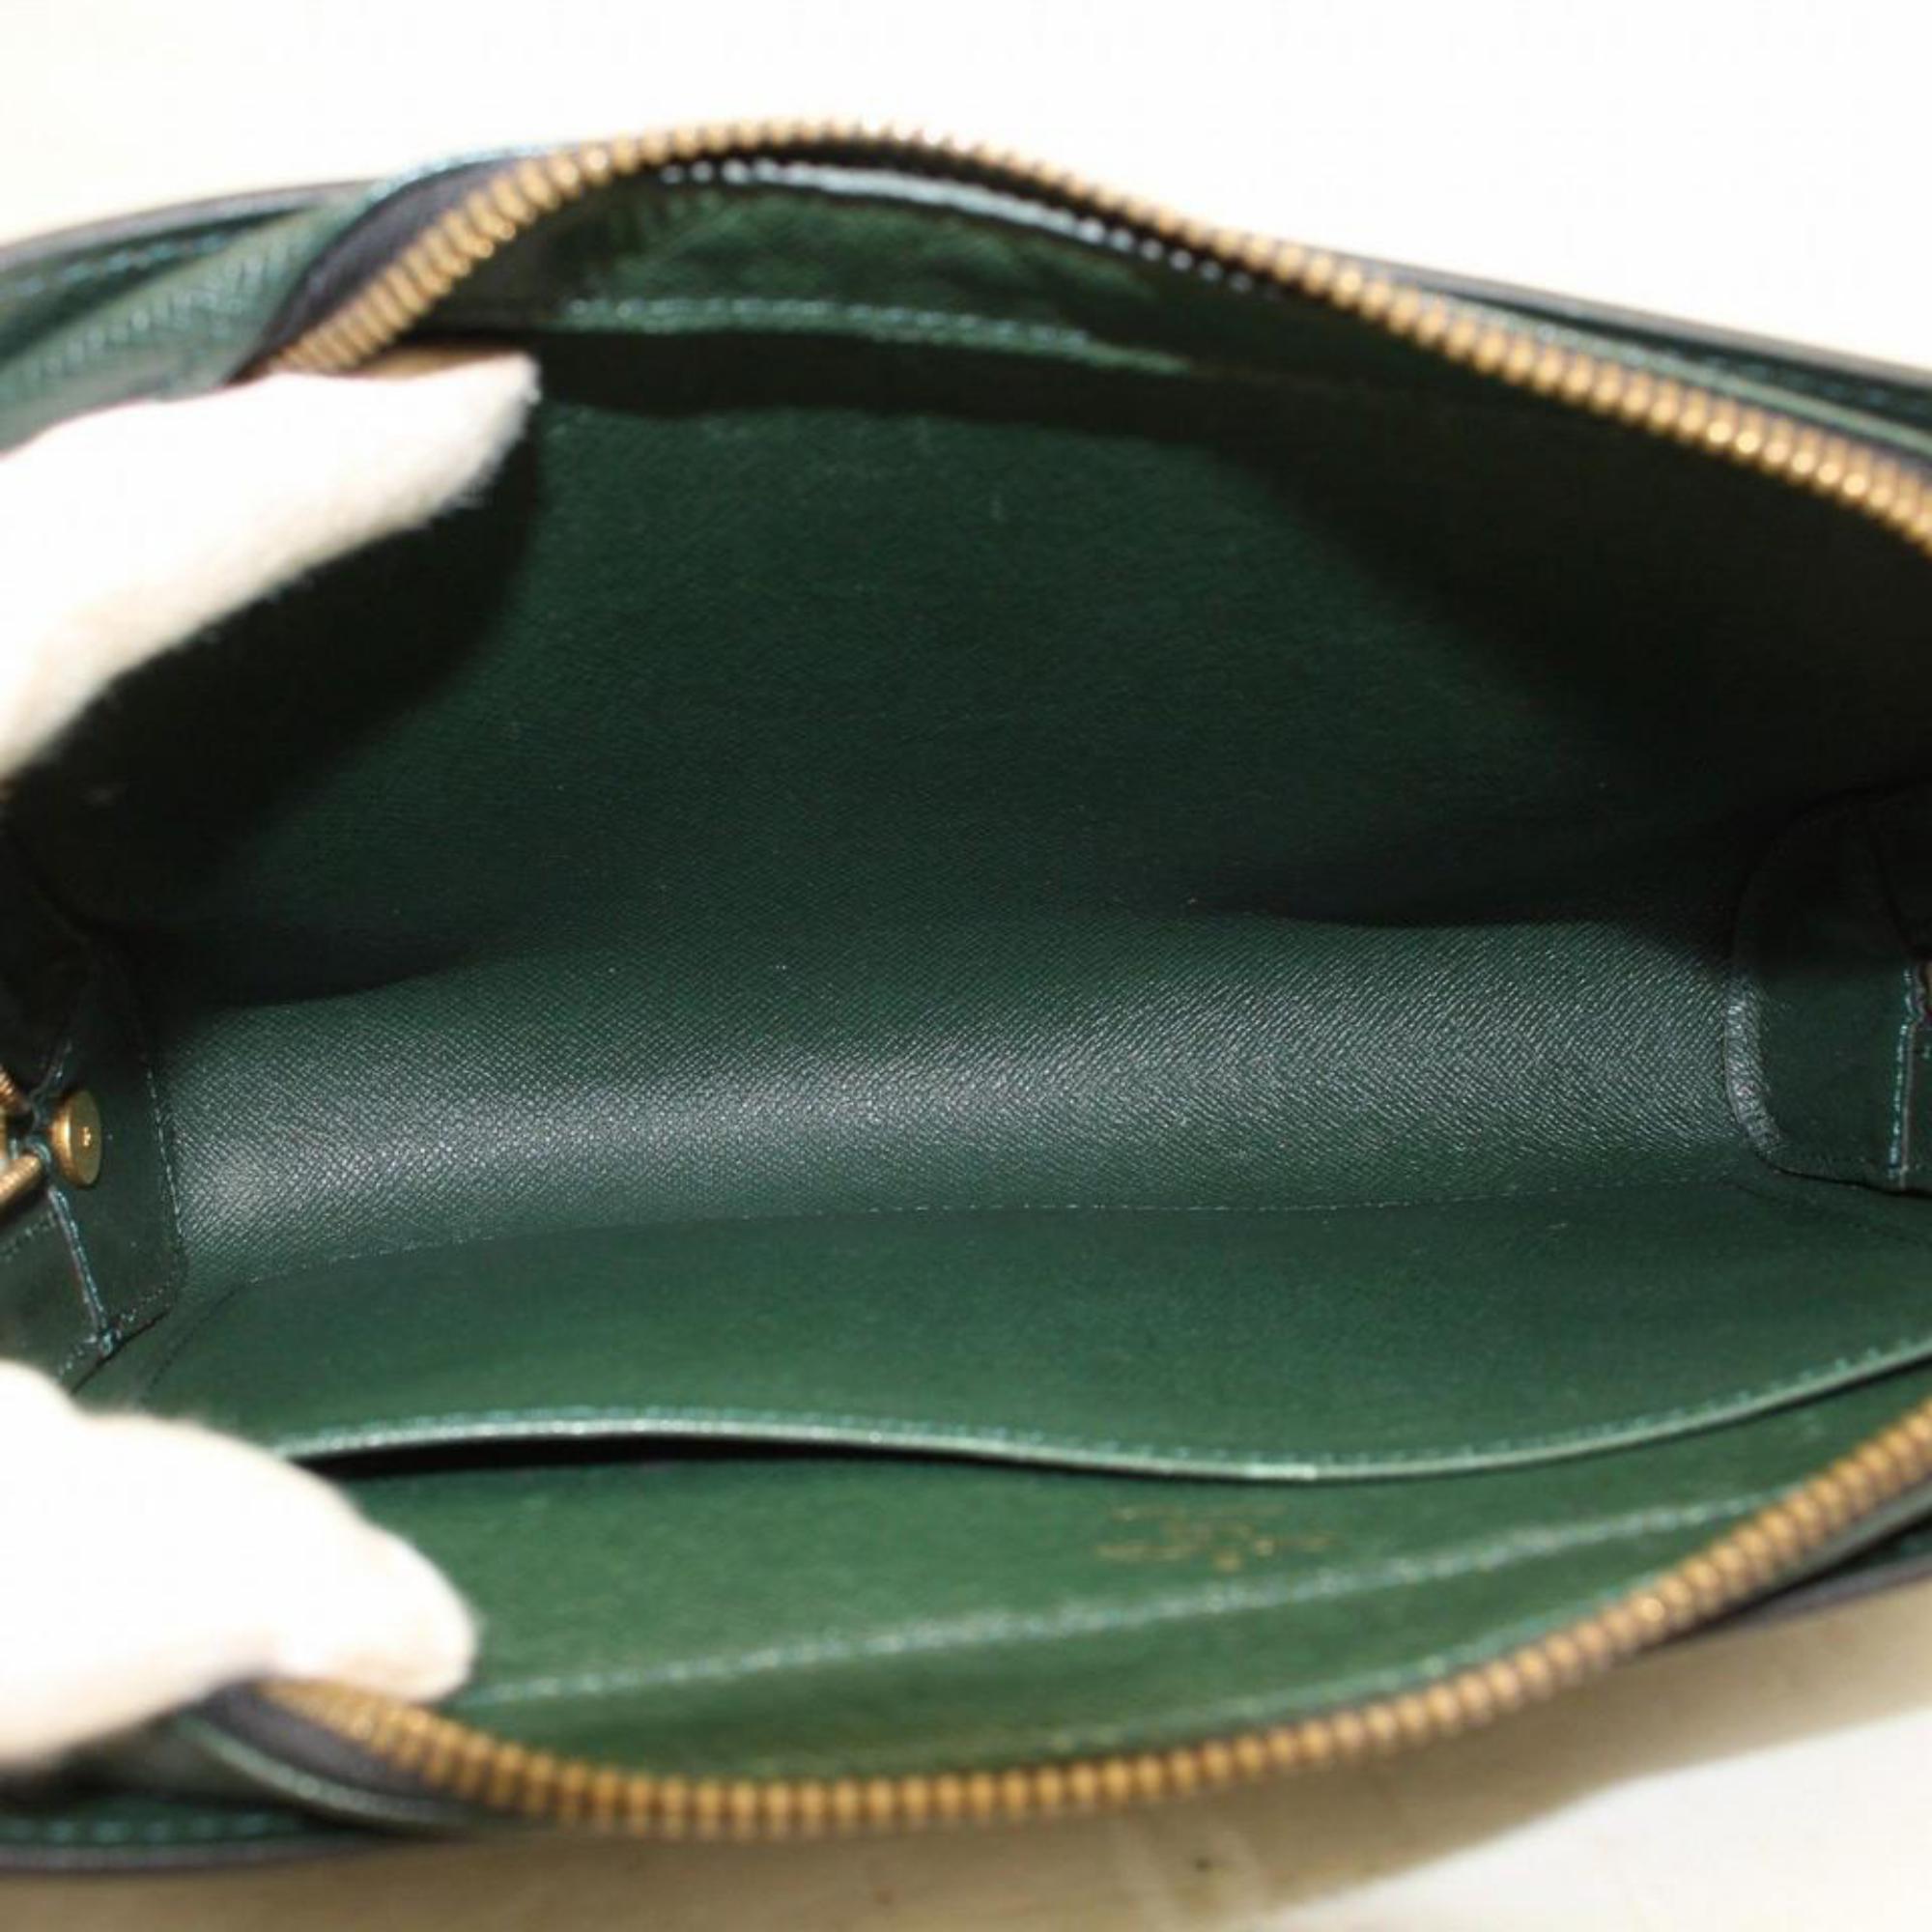 Black Louis Vuitton Green Orsay Epicea Taiga Leather Wristlet 868595 Cosmetic Bag For Sale